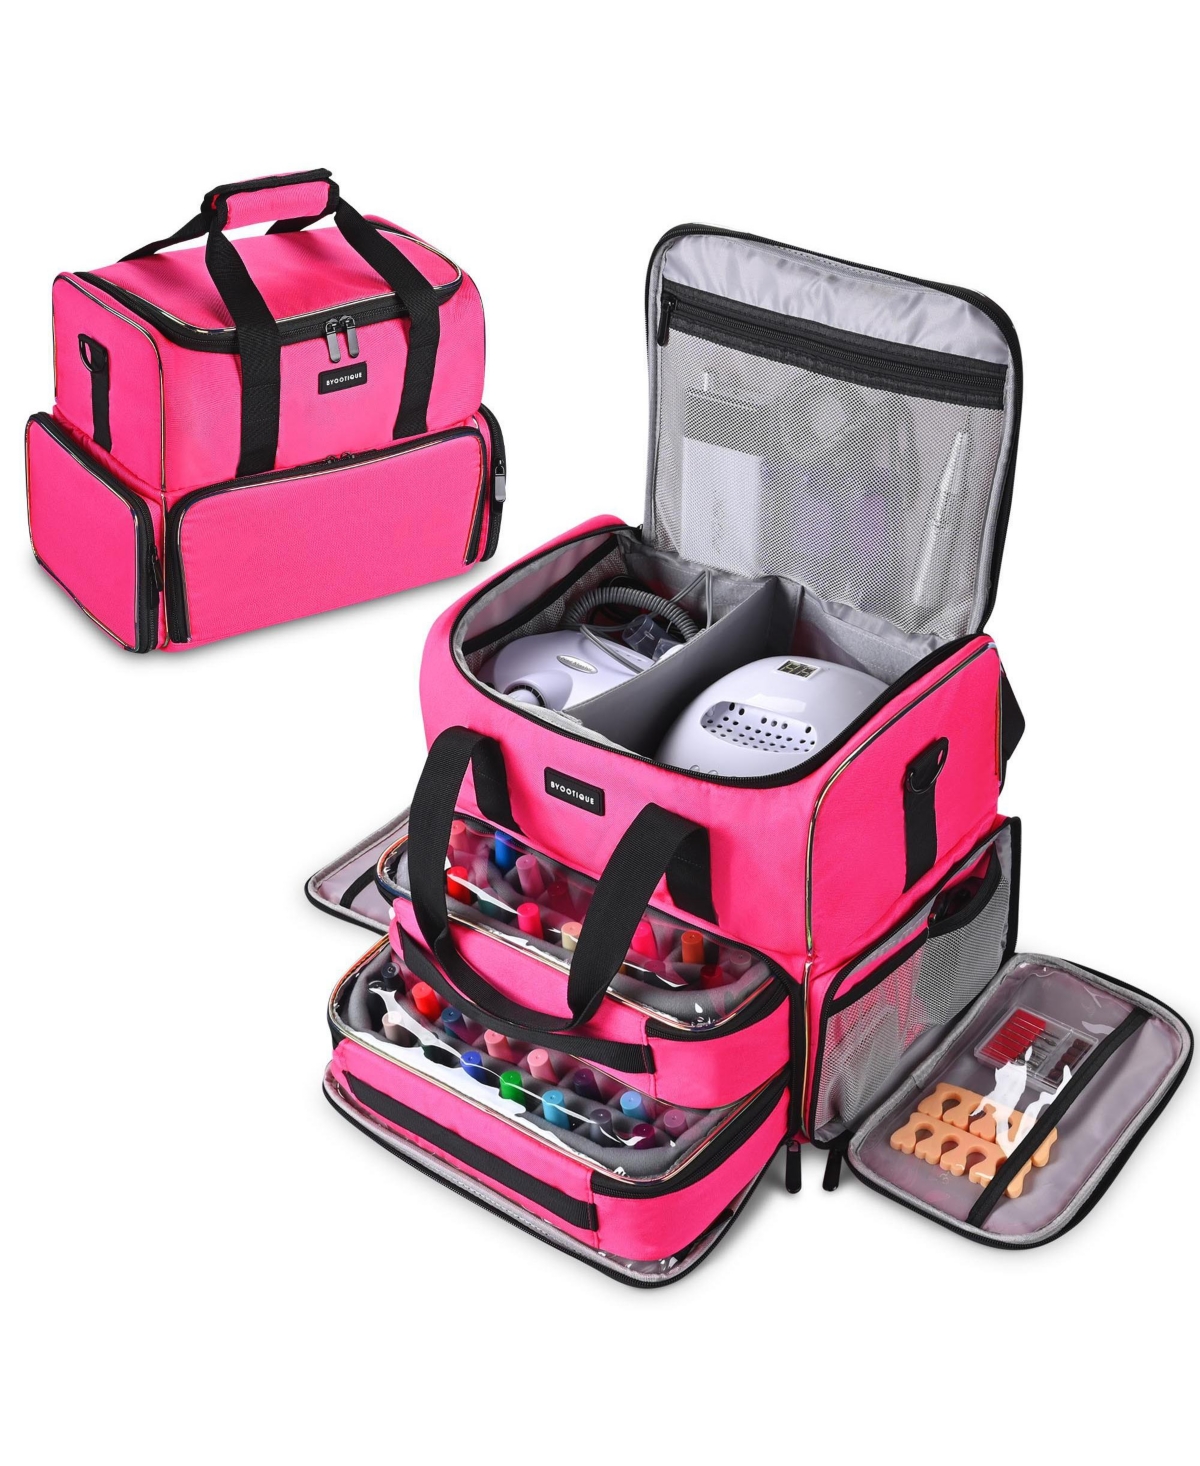 Double Layer Nail Polish Carrying Case Nail Organizer With 2 Removable Transparent Bags For Manicurists Nail Technicians Makeup Artists, Bri